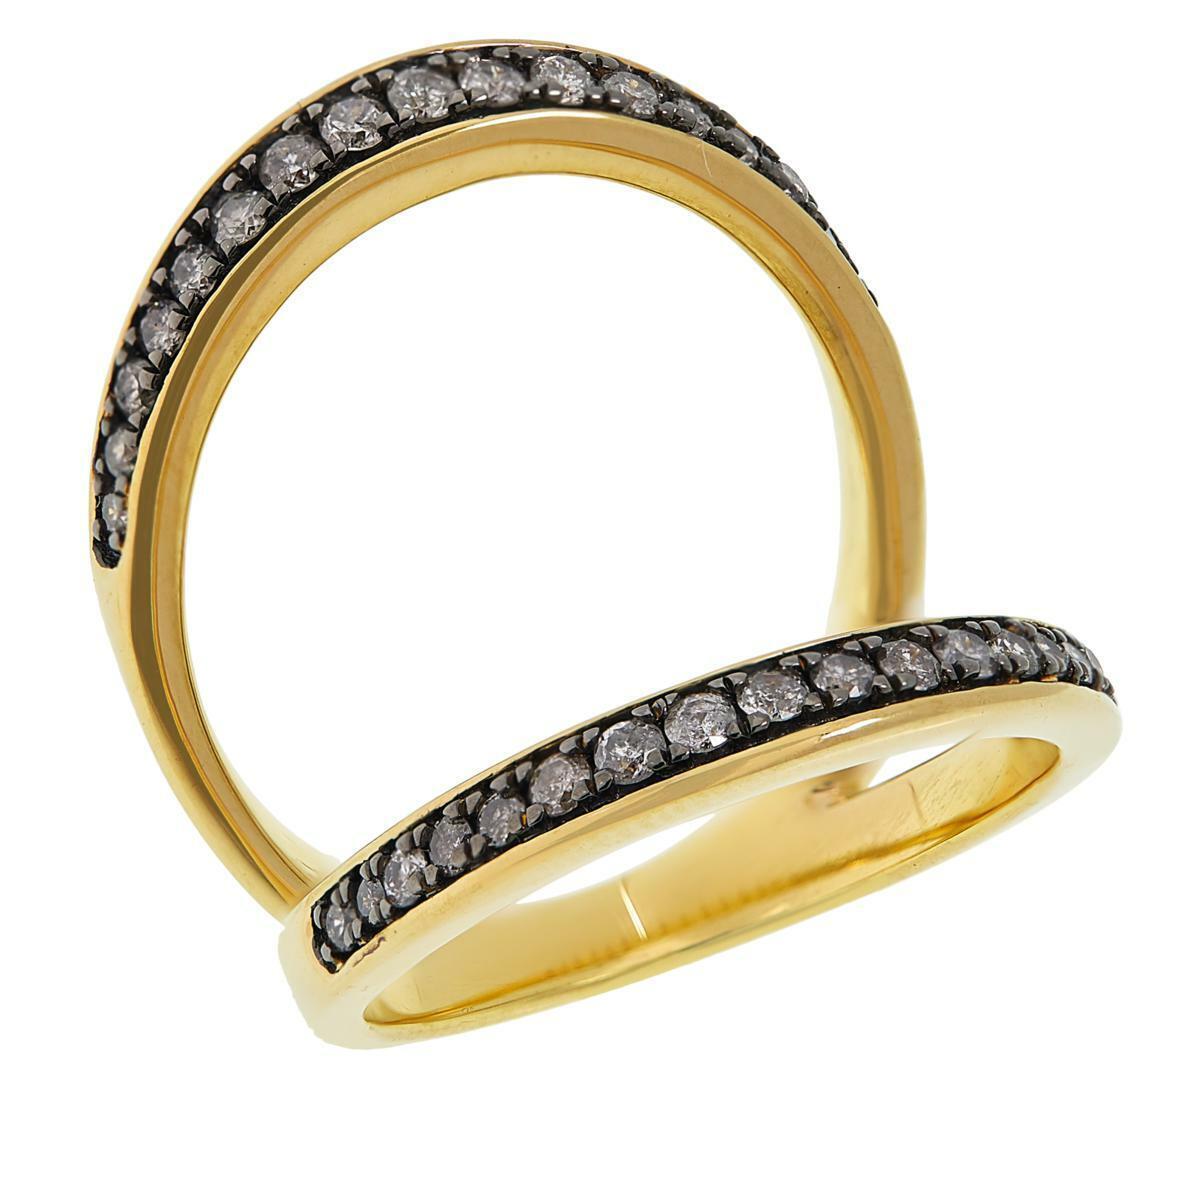 Colleen Lopez Gold-Plated 0.50ct White Diamond Negative Space Ring, Size 7